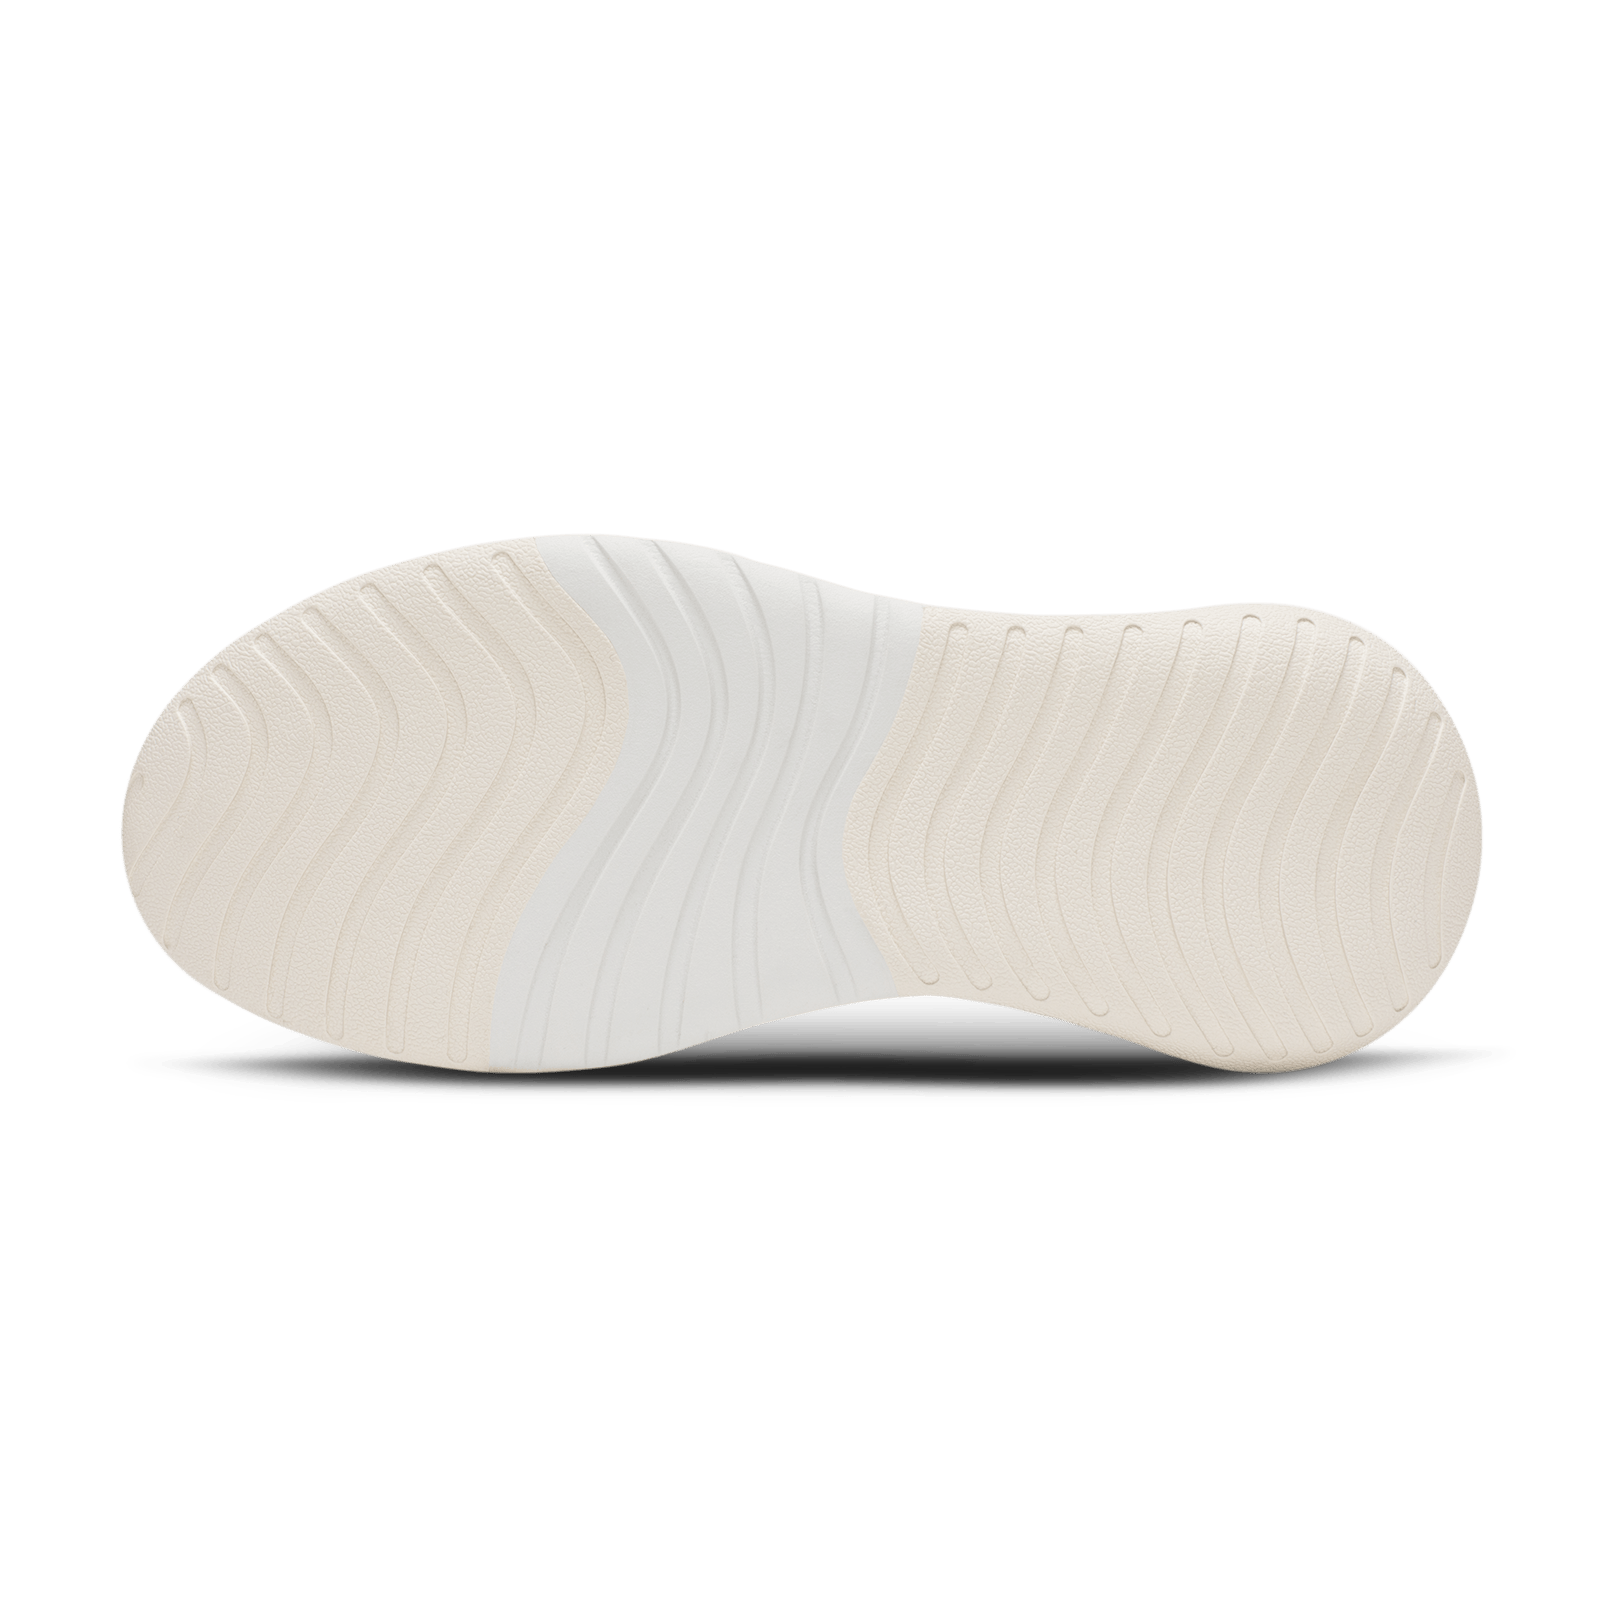 Women's Couriers - Blizzard (Natural White Sole)